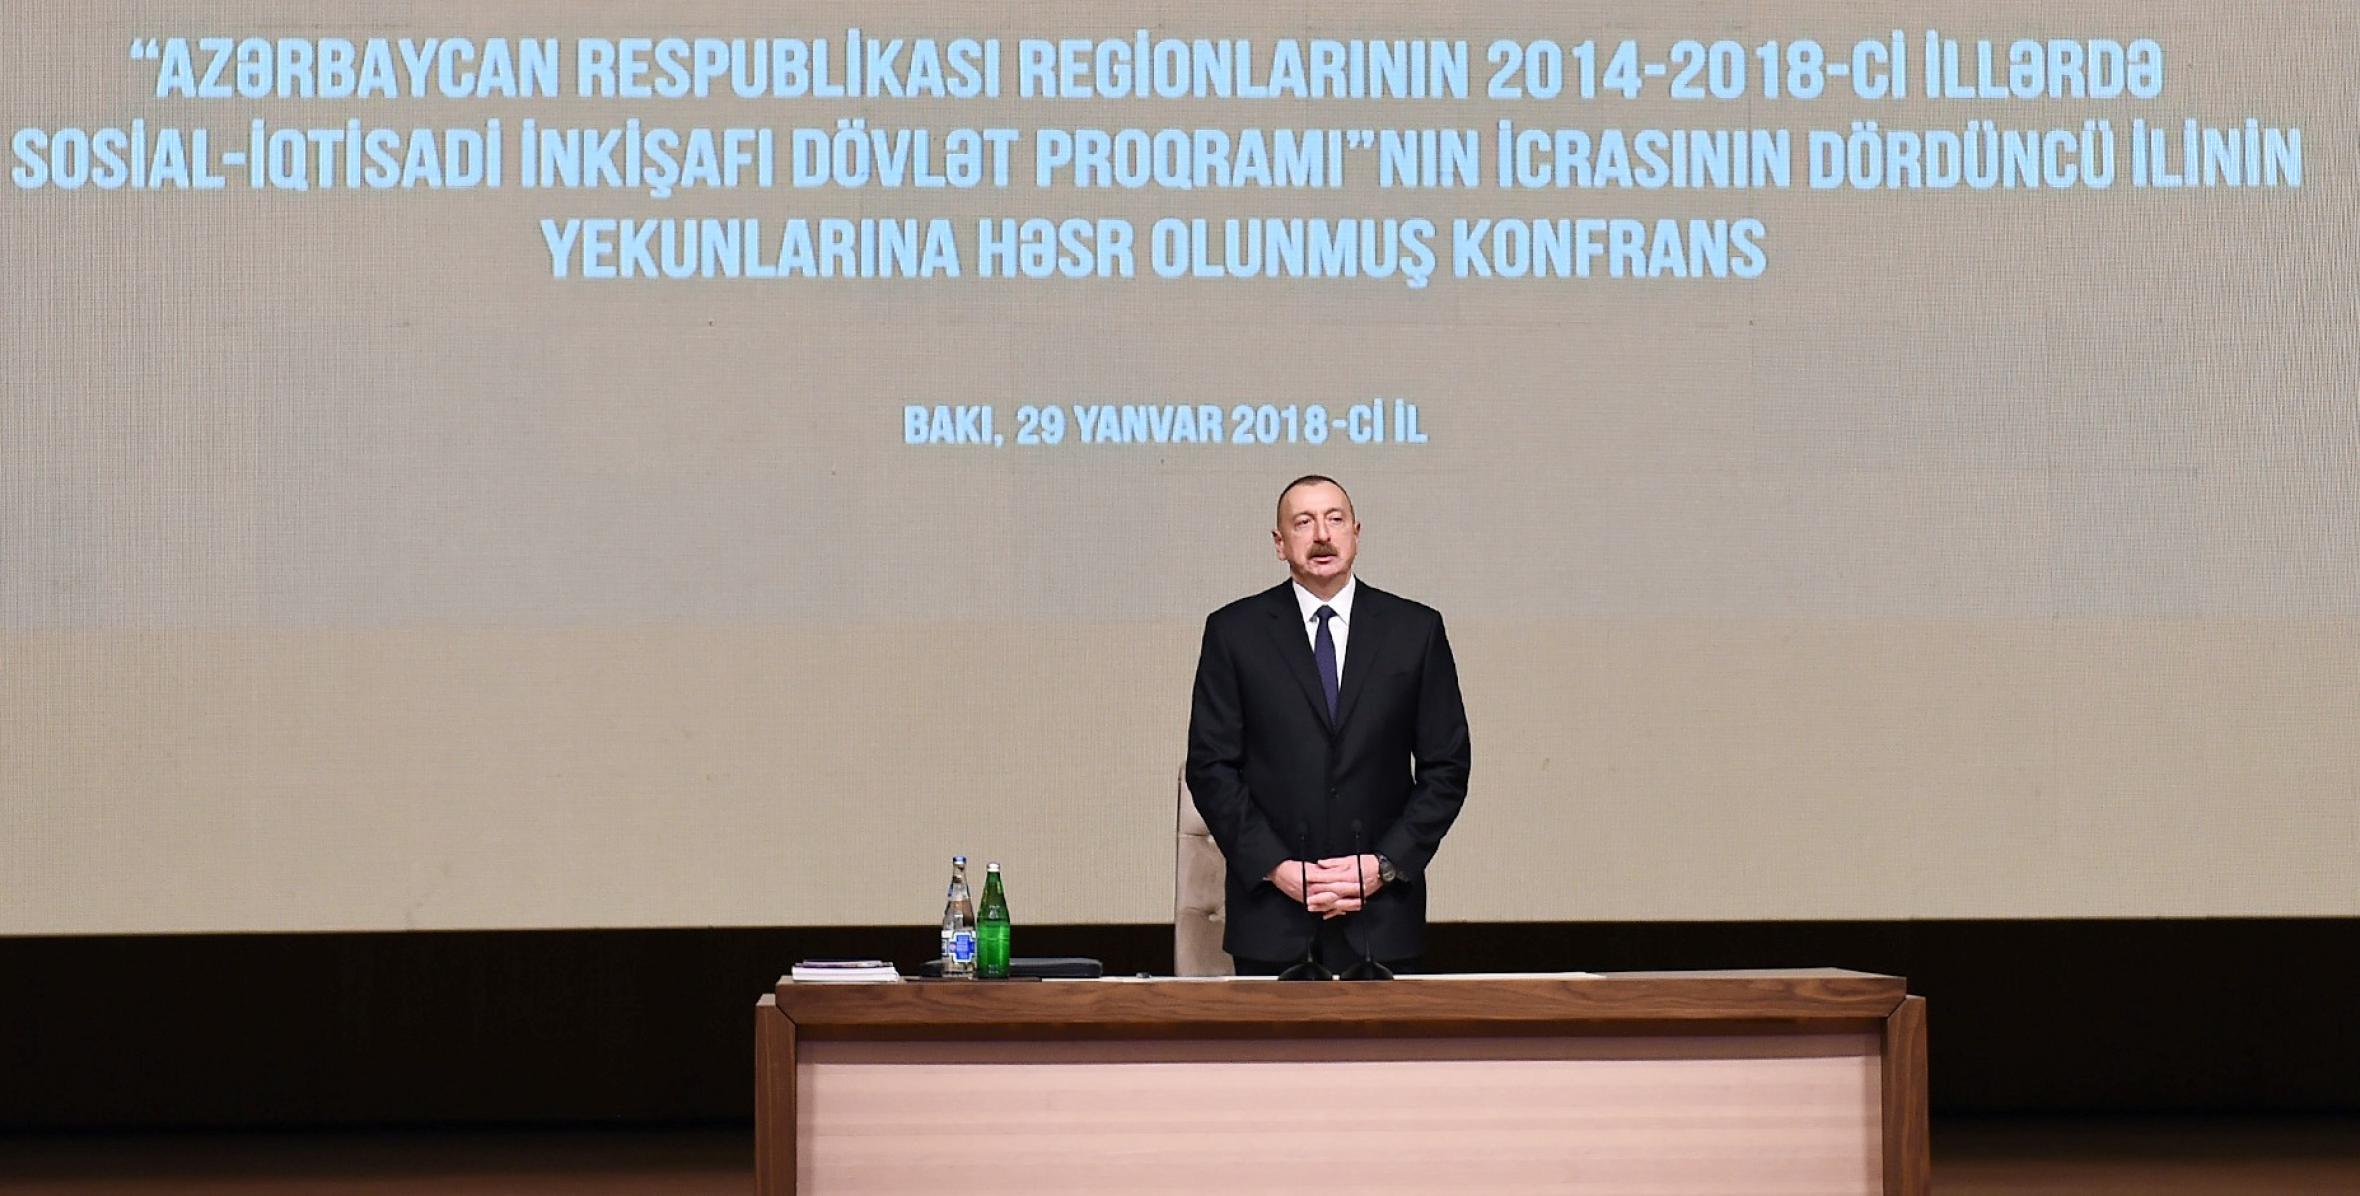 Opening speech by Ilham Aliyev at the conference dedicated to results of fourth year implementation of the State Program on socio-economic development in 2014-2018